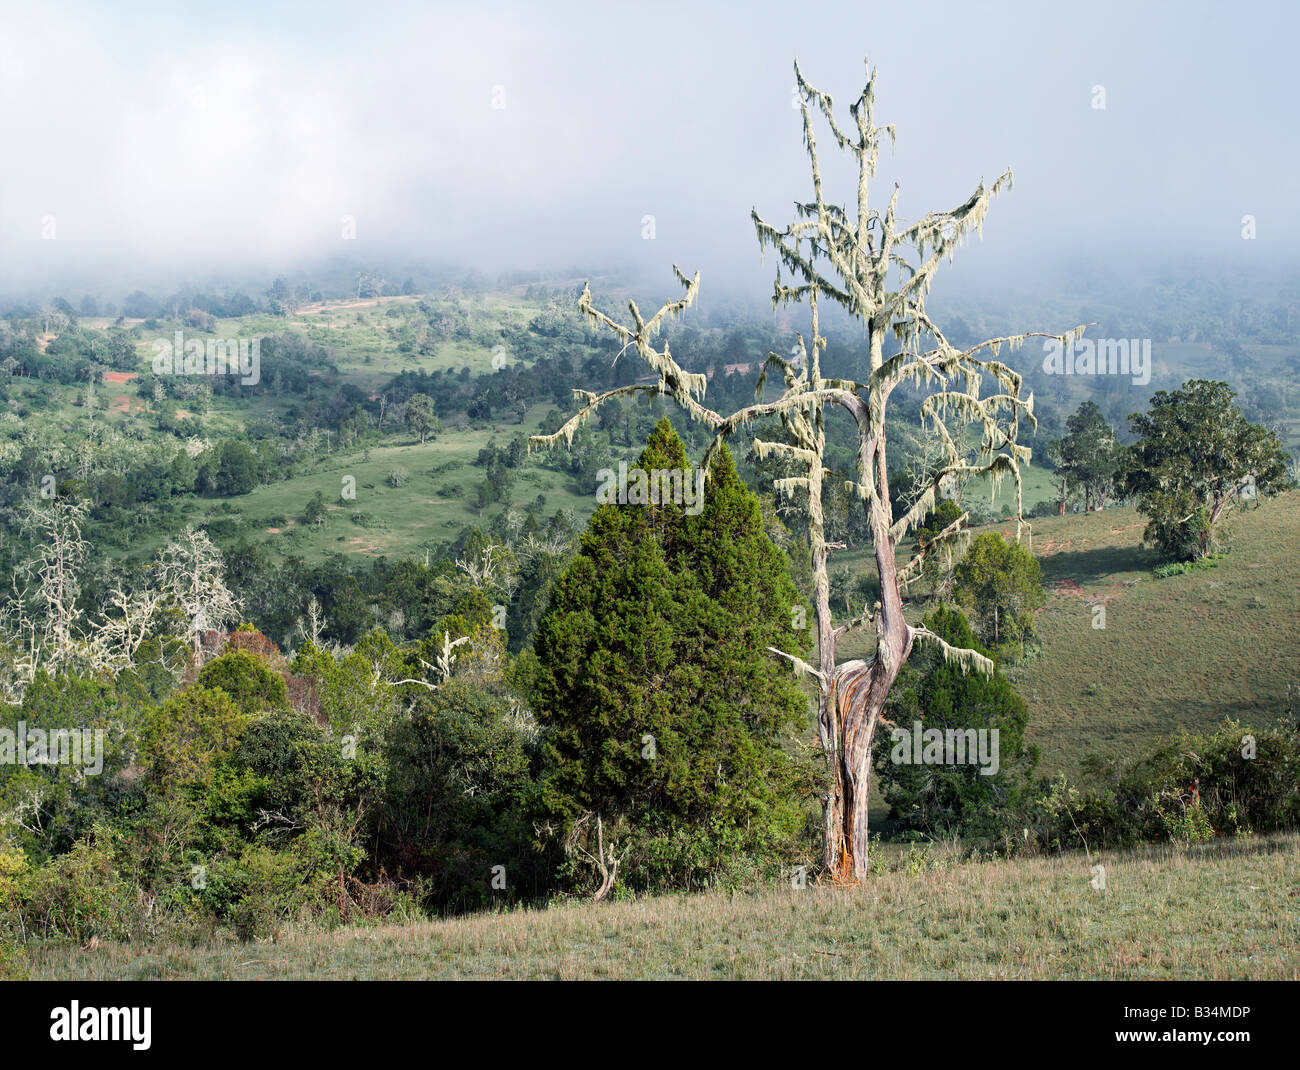 Kenya, Samburu District, Latakwen. Lichen- covered cedar trees and low clouds are a feature of the 8,000-foot-high highland area of Samburu District, close to Poro. Stock Photo